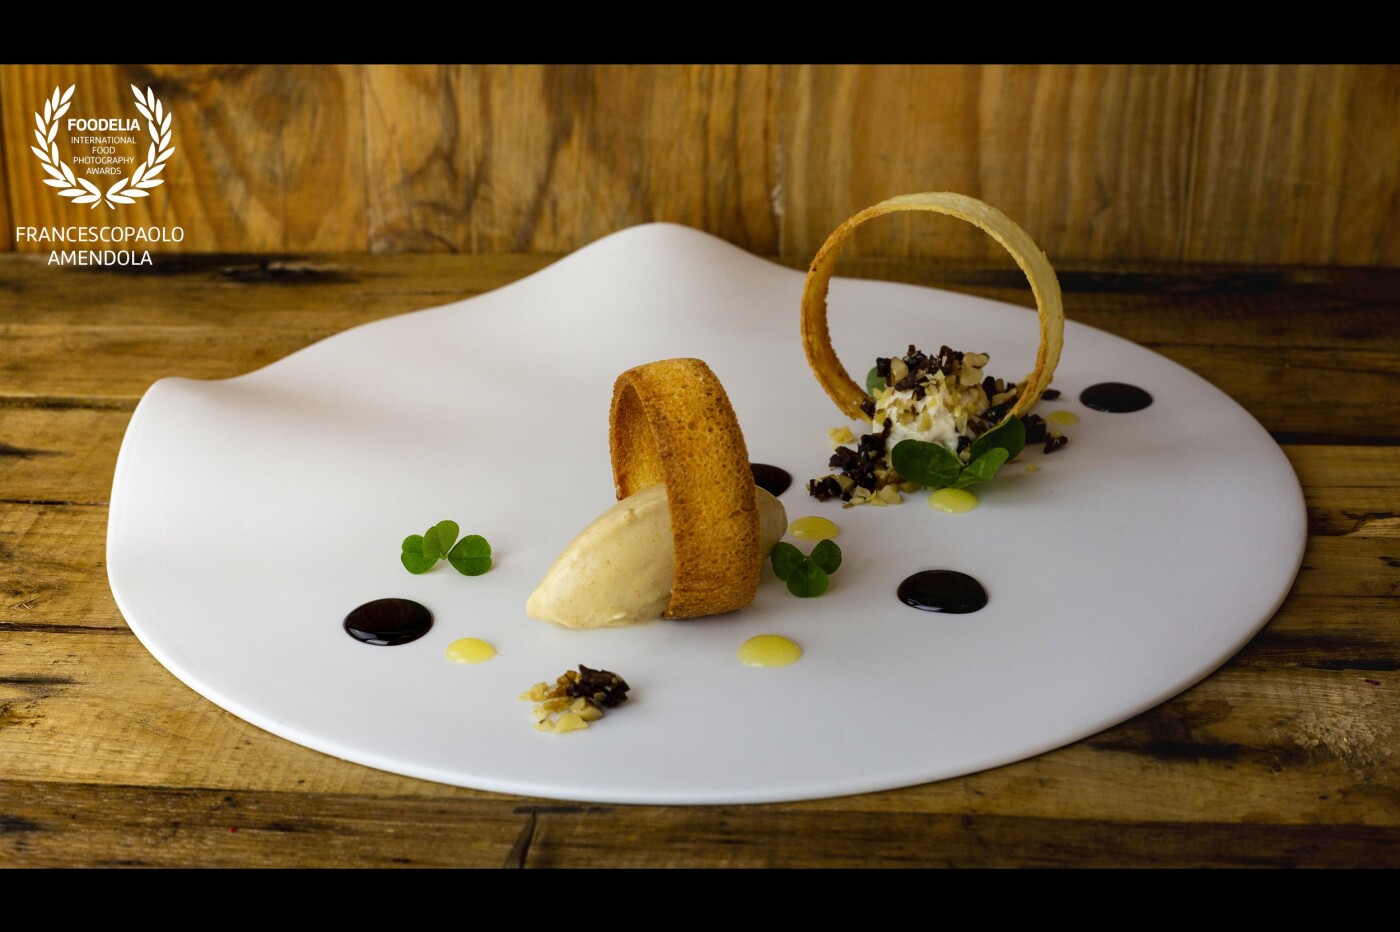 This dish was made by chef Antonio Biafora for Biafora Restaurant. A dish through which they have revisited an ancient local snack called "bread and dried figs".<br />
Restaurant: @biafora_resort